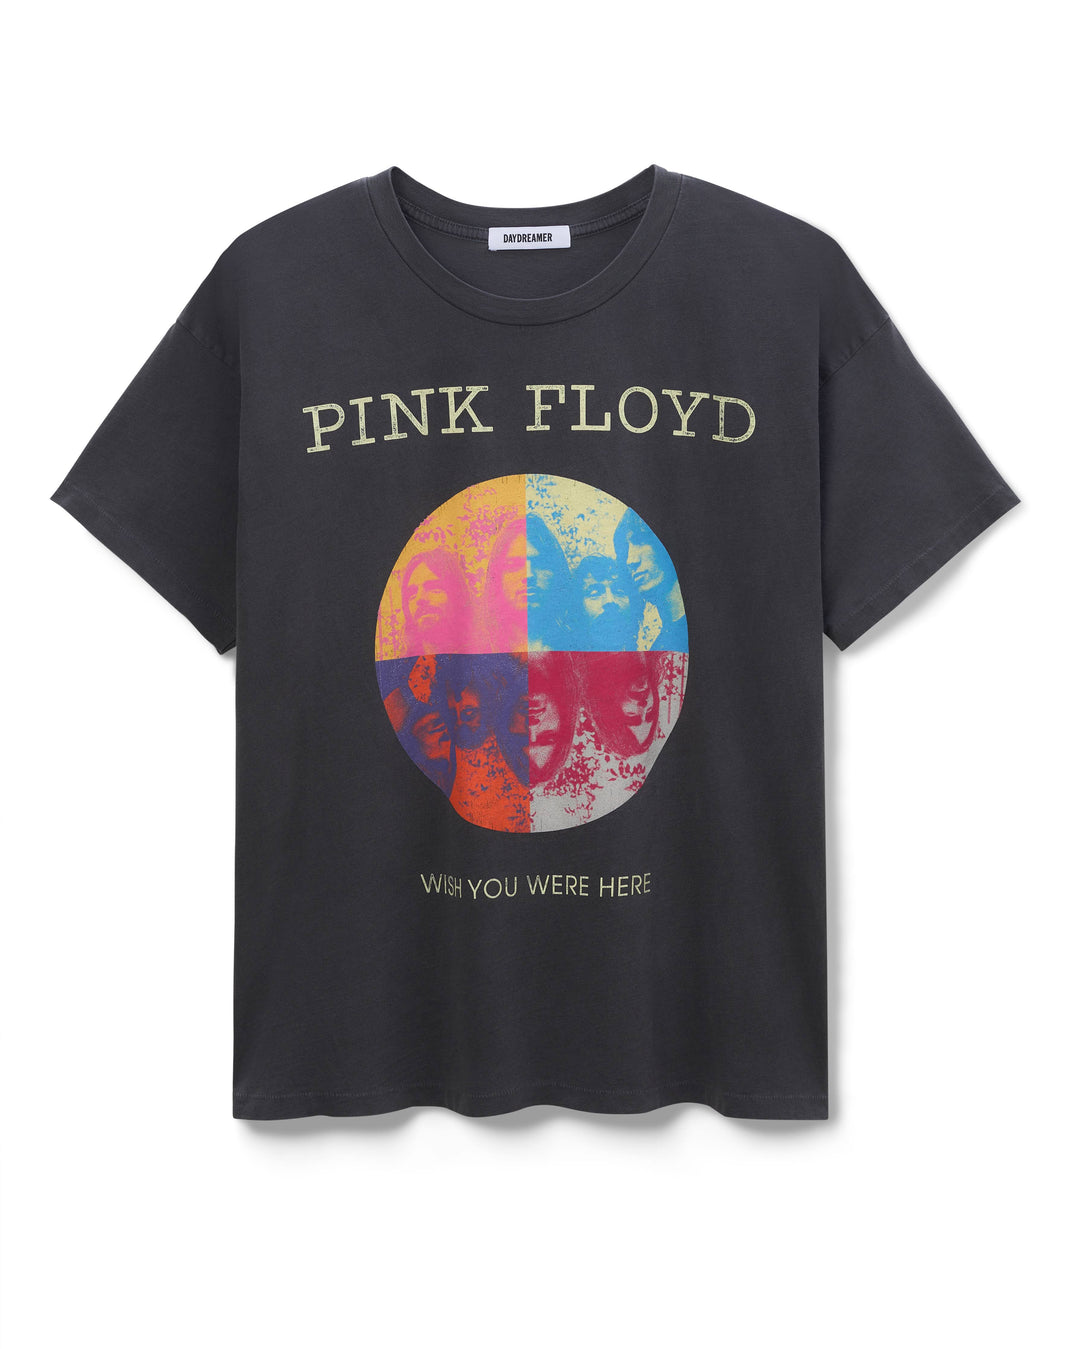 PINK FLOYD WISH YOU WERE HERE MERCH TEE-PIGMENT BLACK - Kingfisher Road - Online Boutique